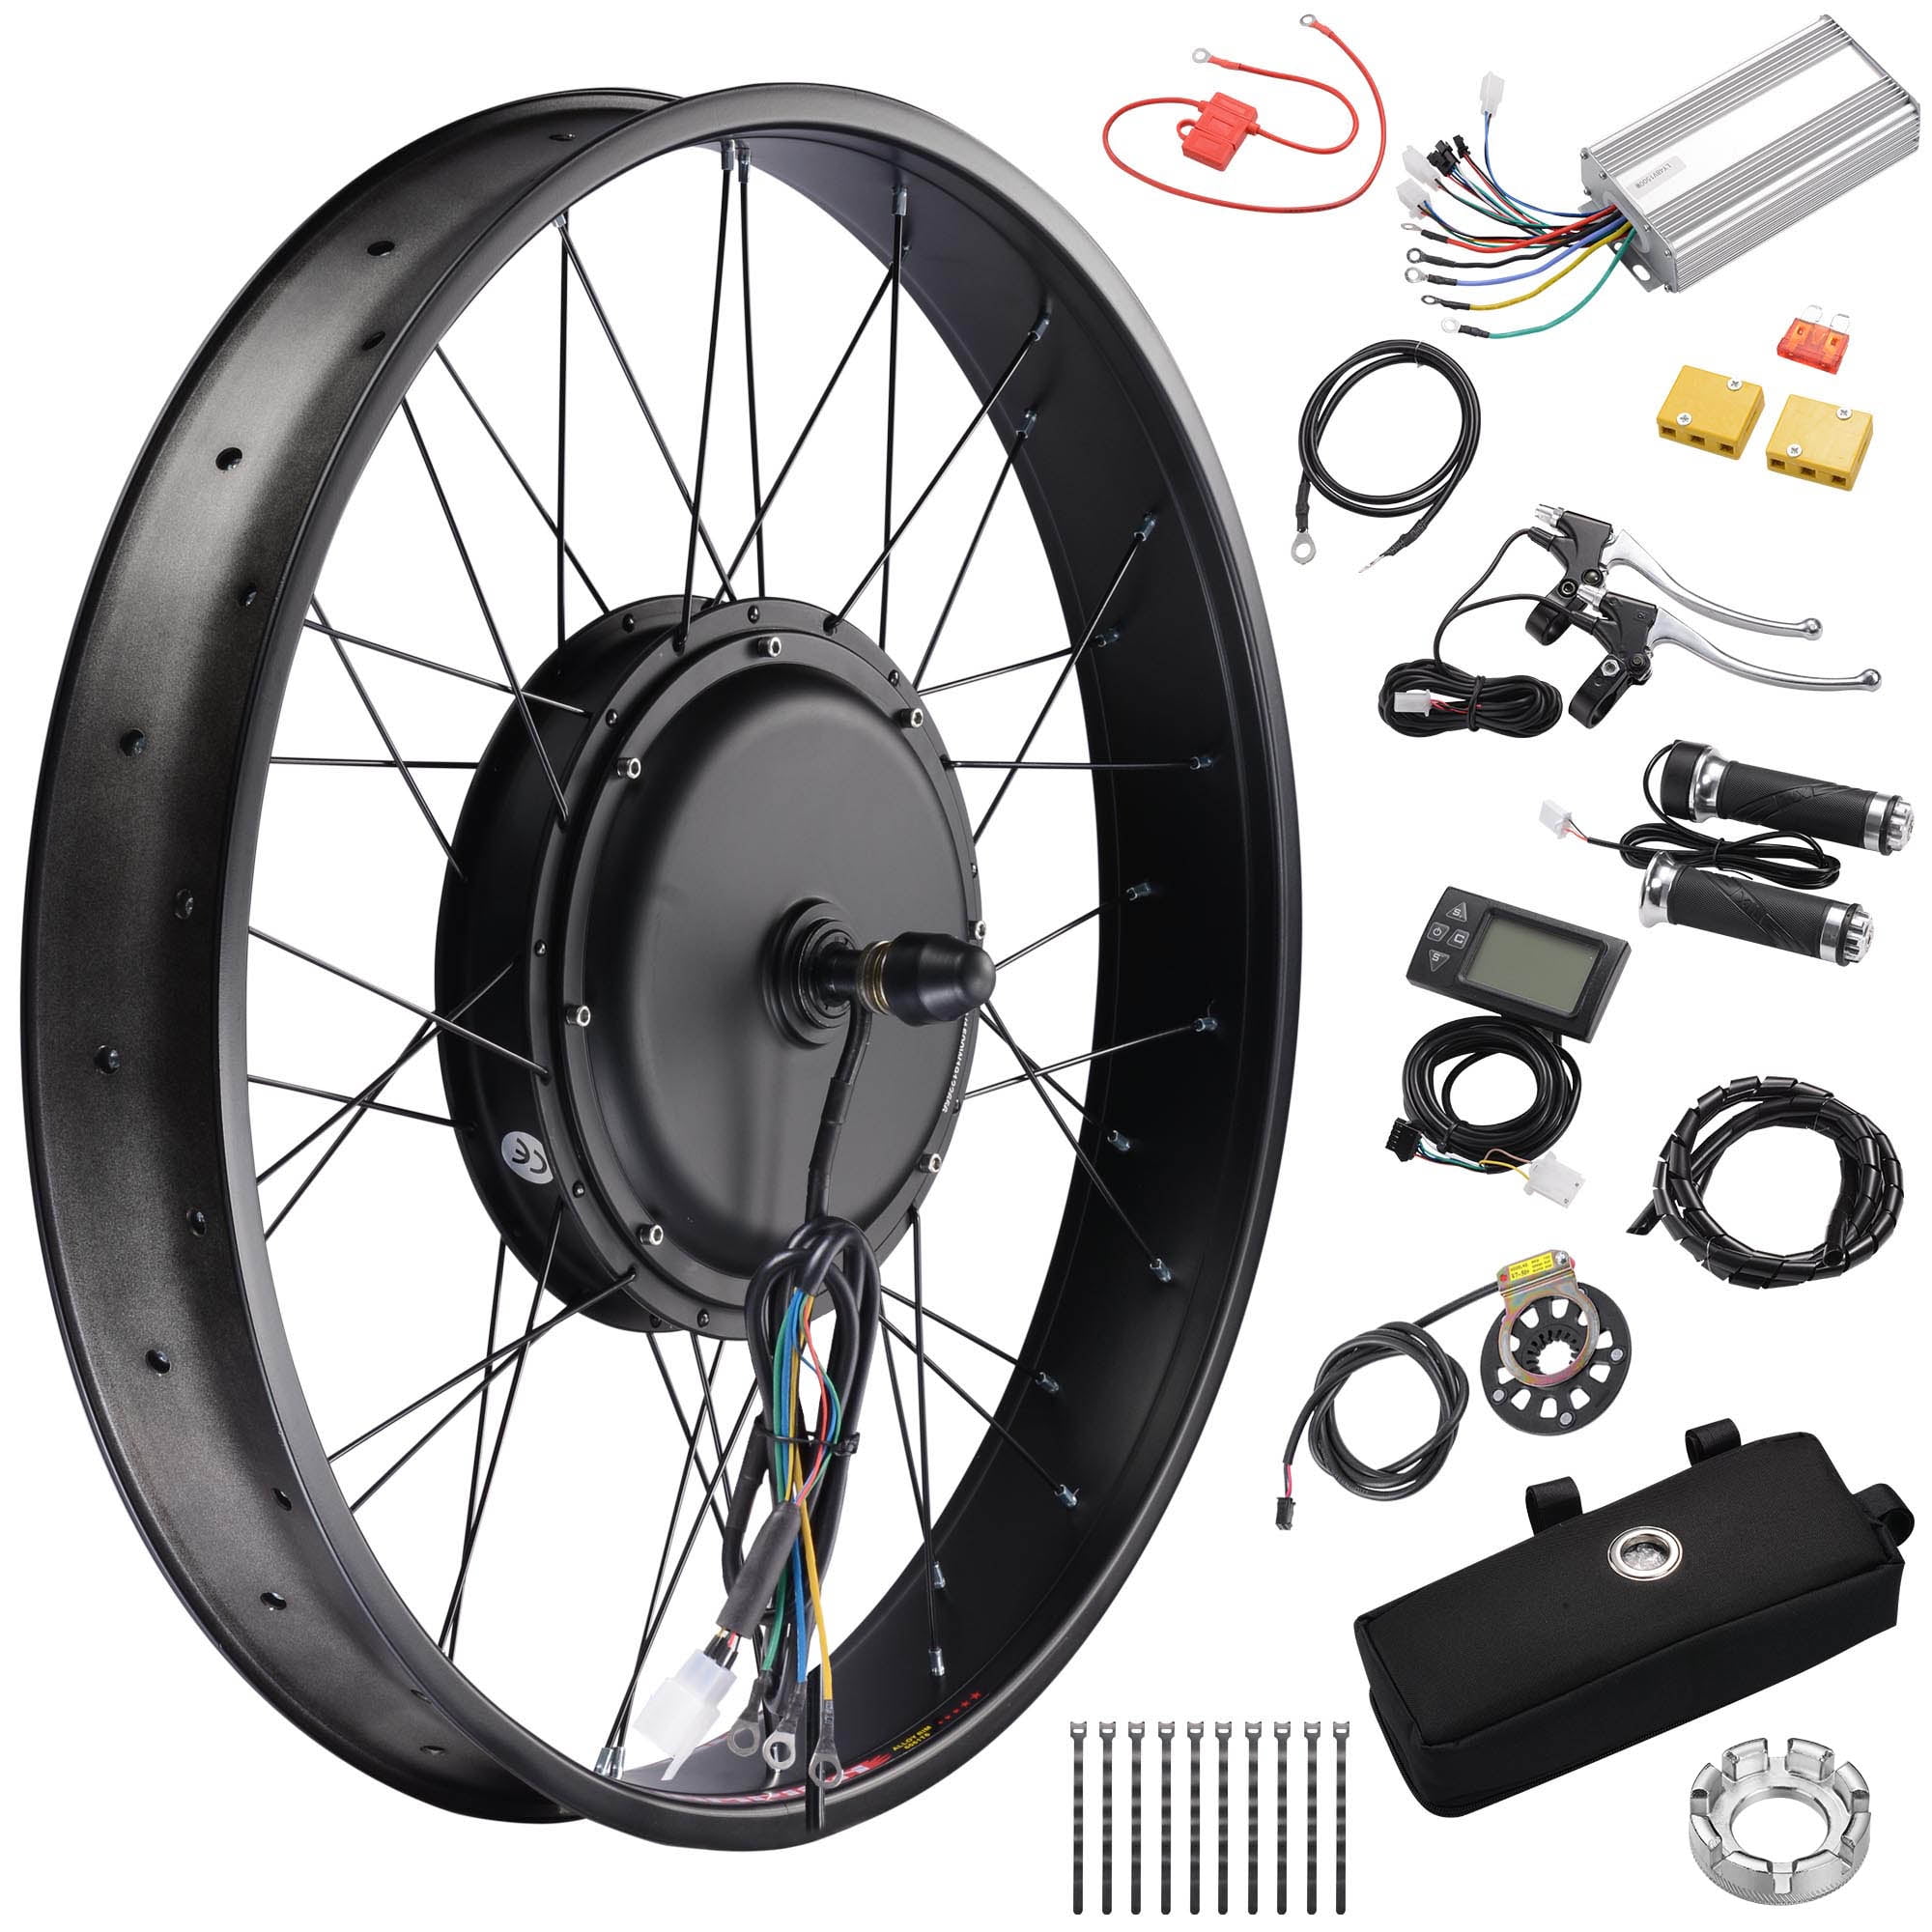 Yescom 26 Inch Electric Bicycle Motor Kit for sale online 